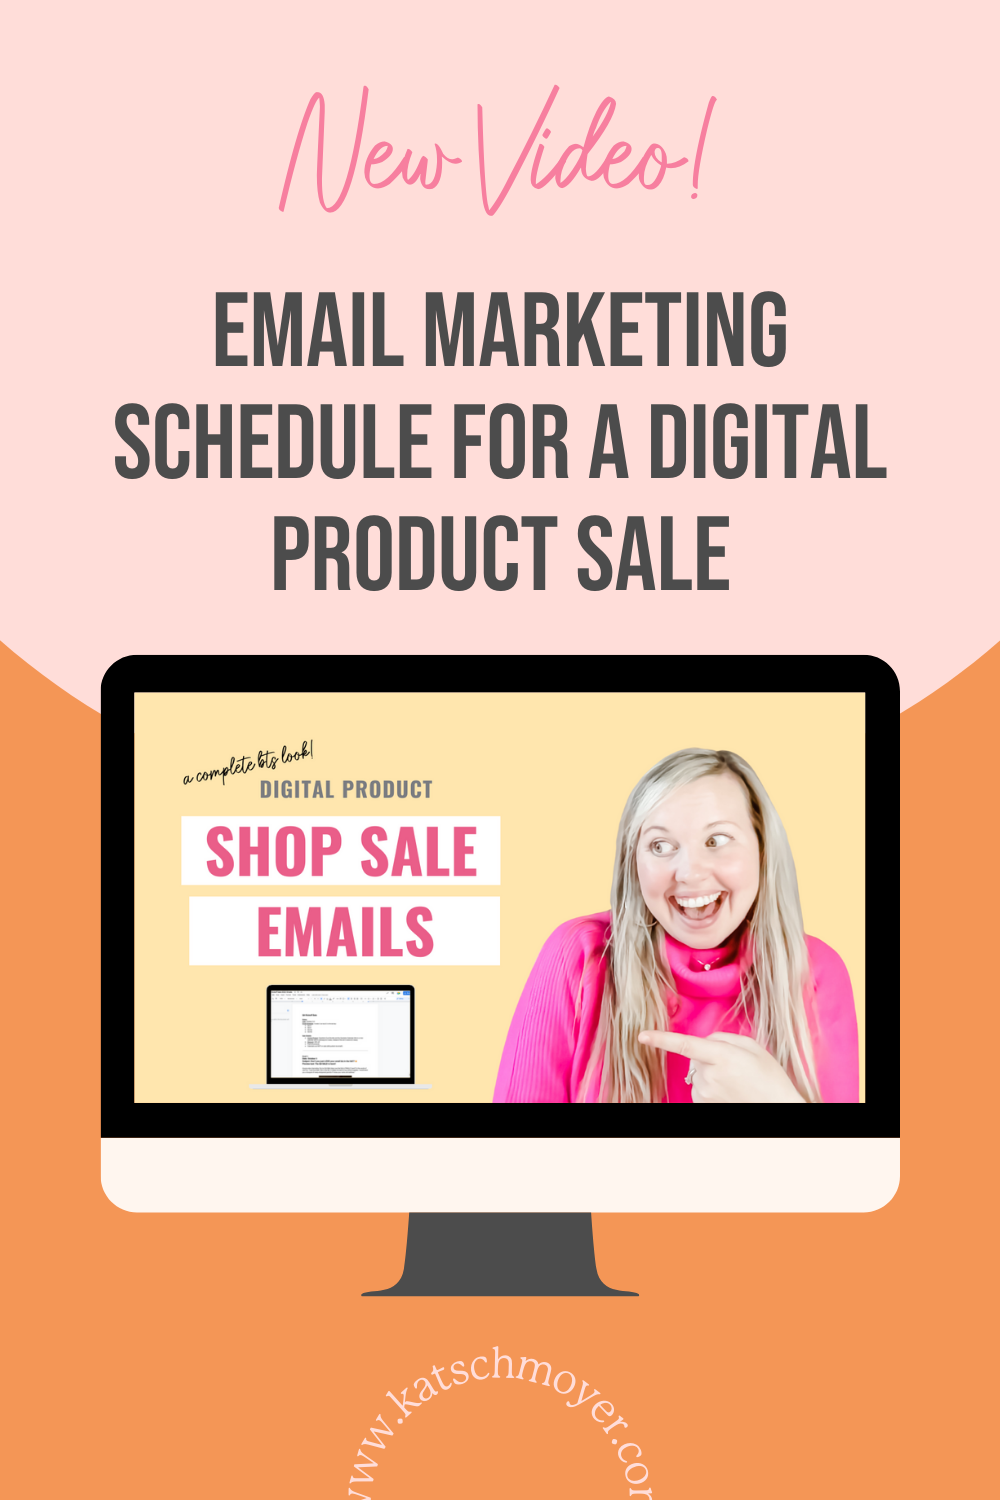 Email Marketing Schedule for a Digital Product Sale